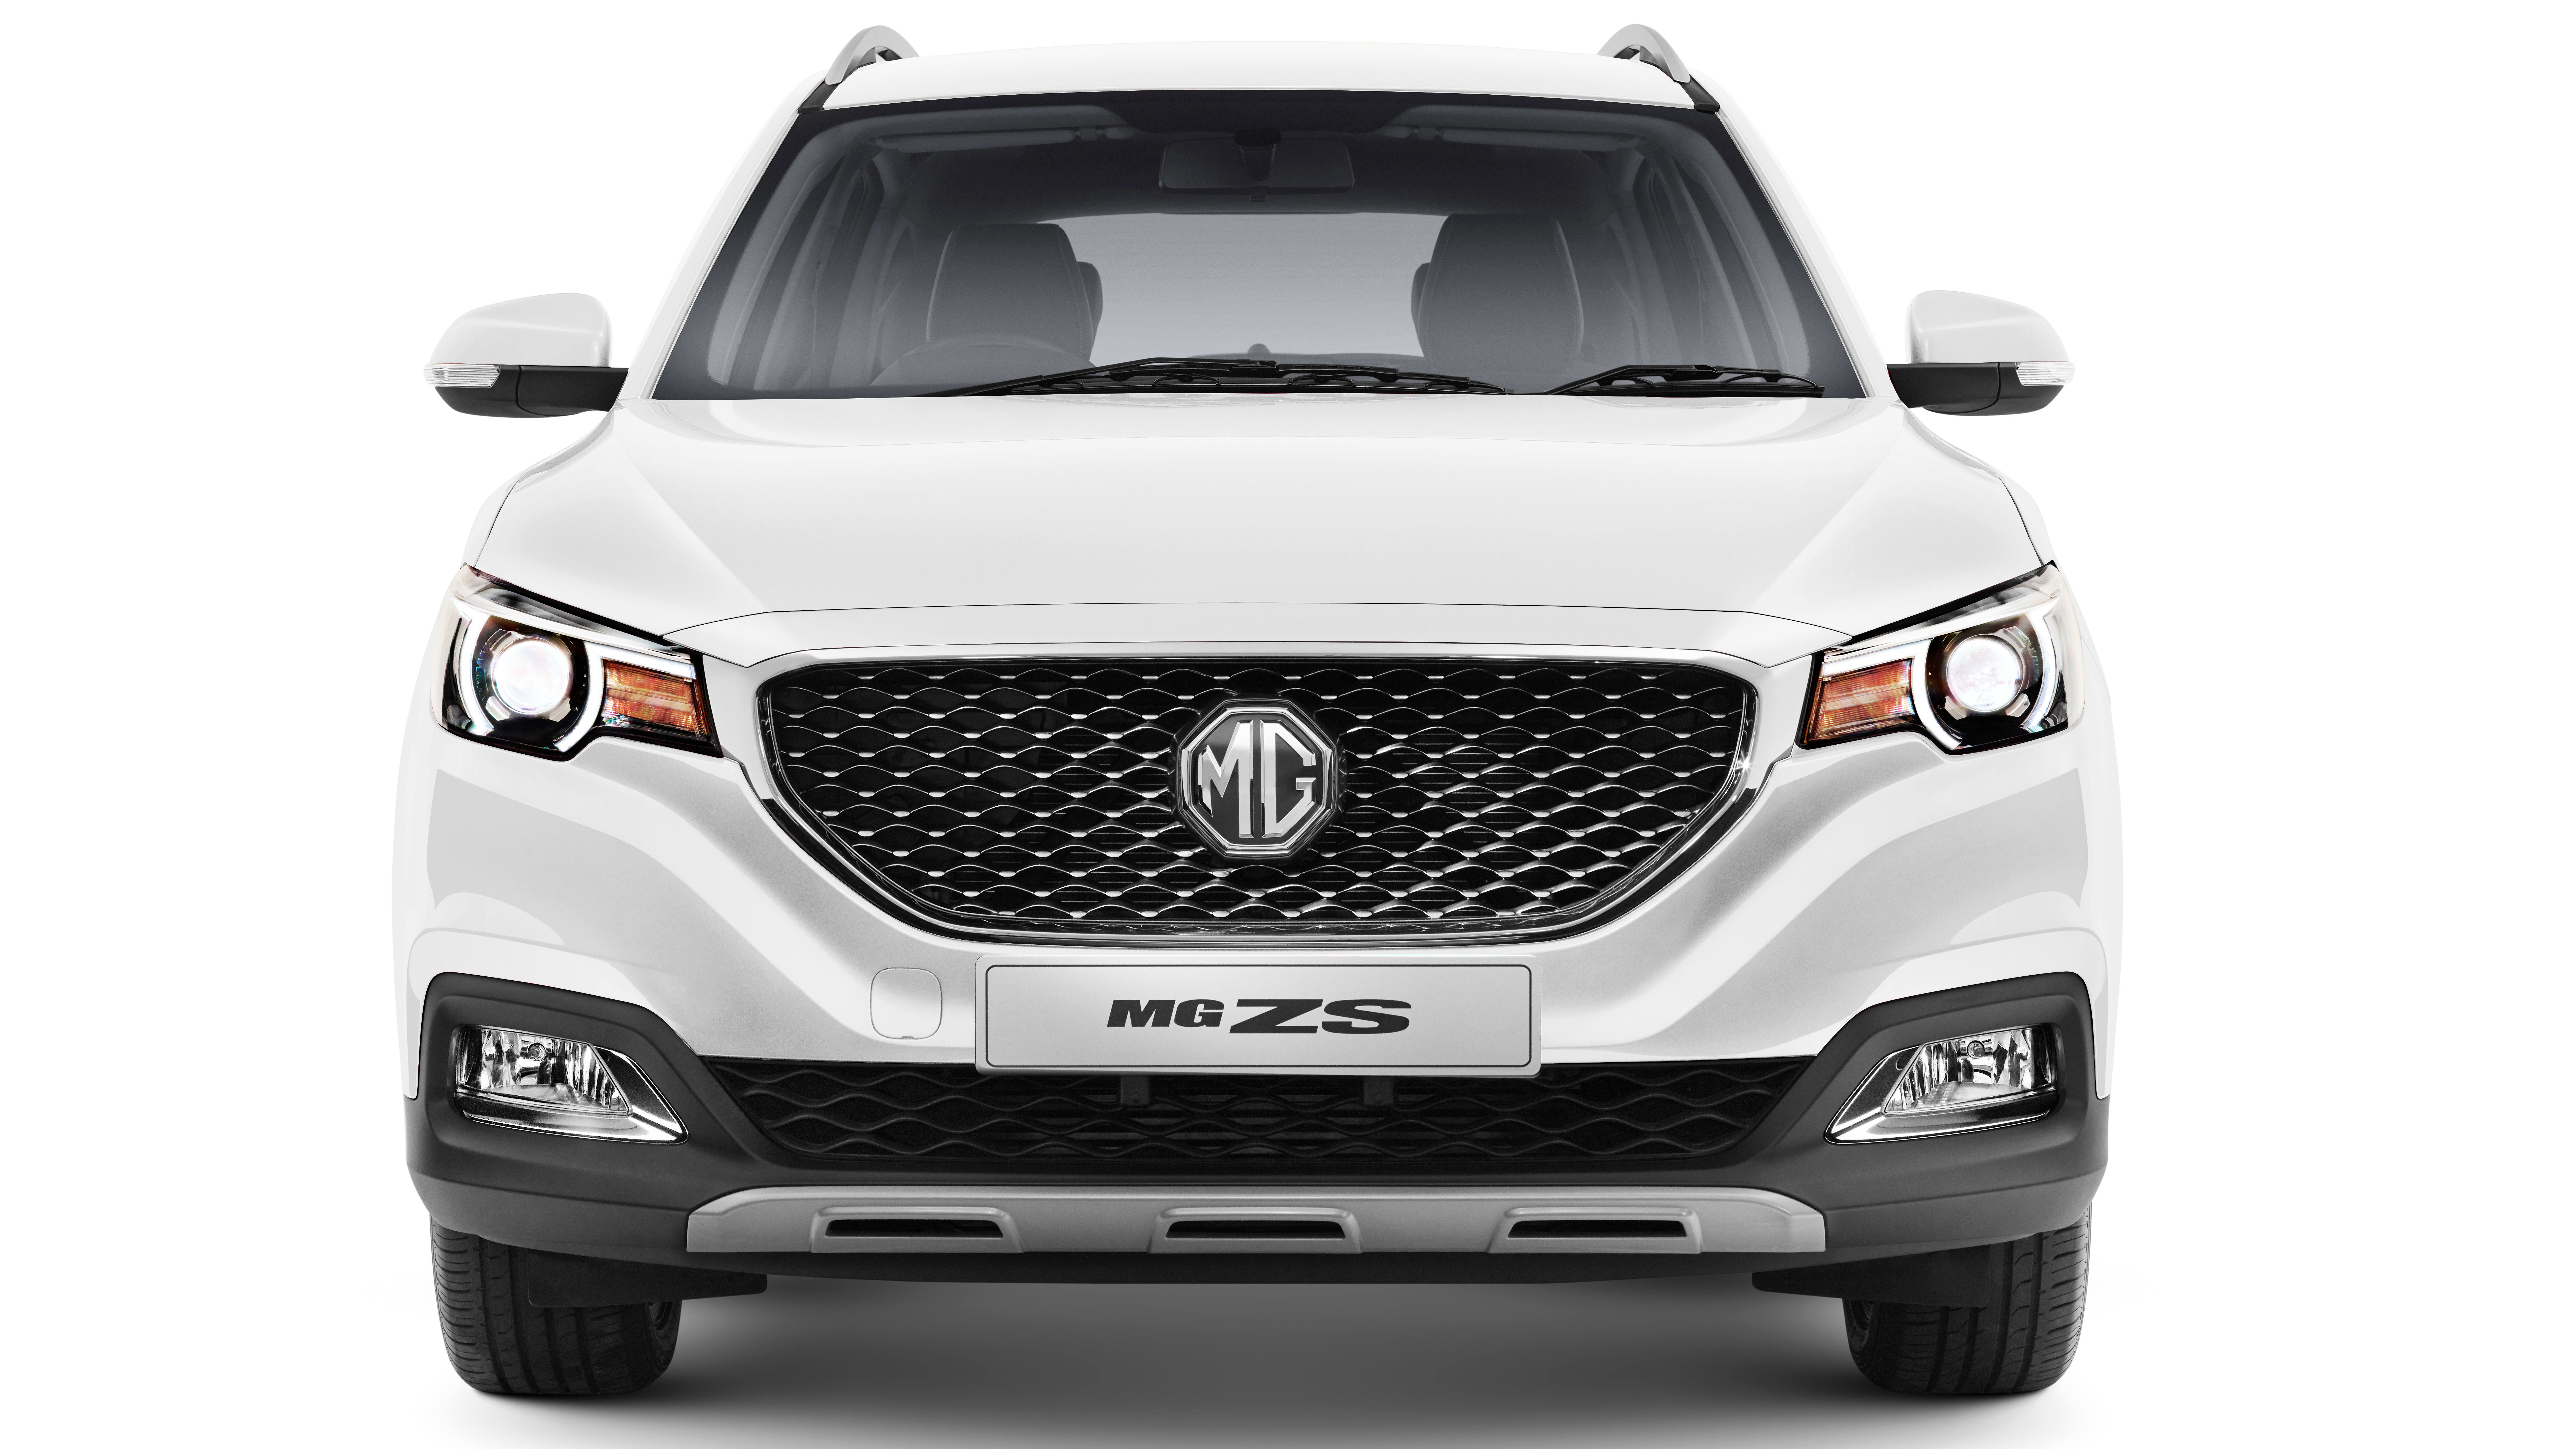 2019 Mg Zs Pricing And Specs Caradvice